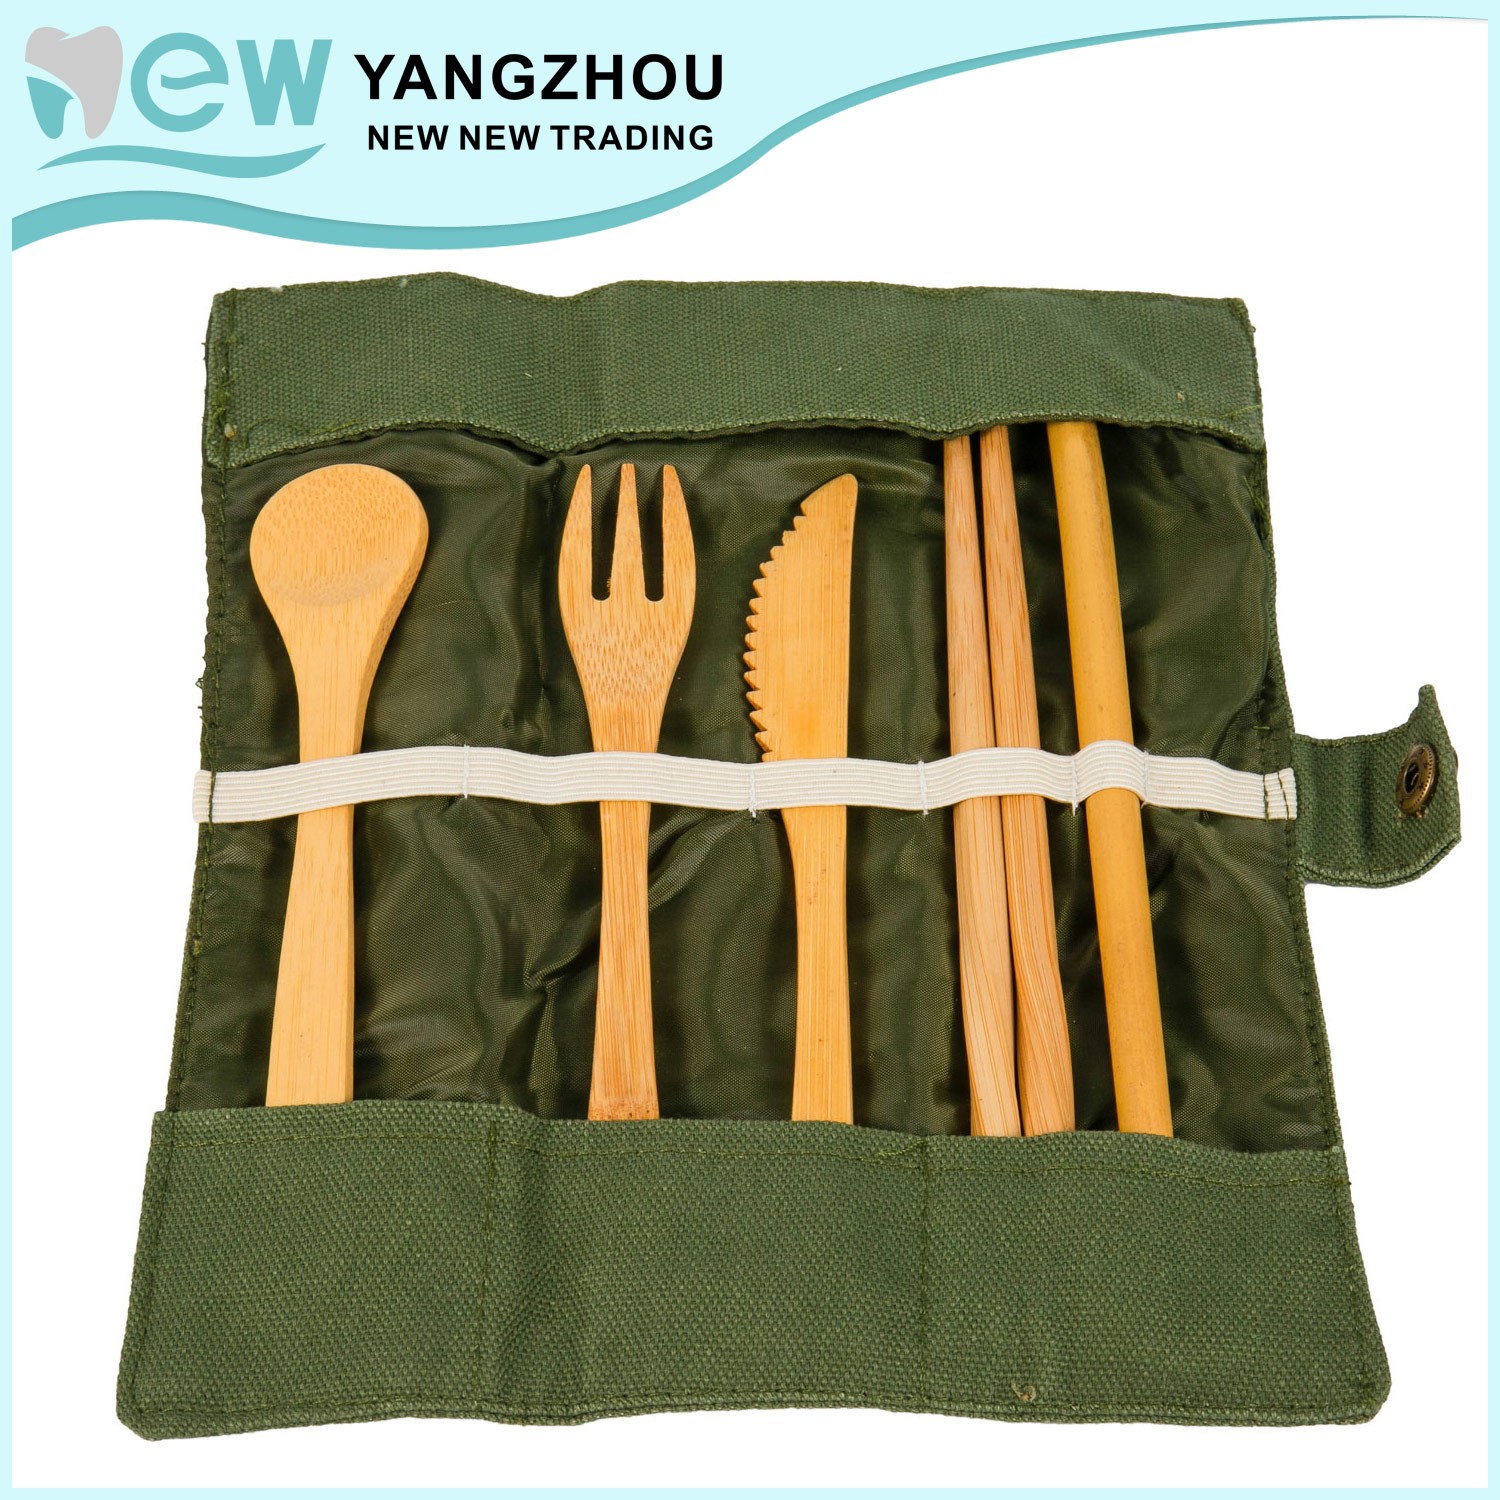 travelling used bamboo cutlery with smaller dimension